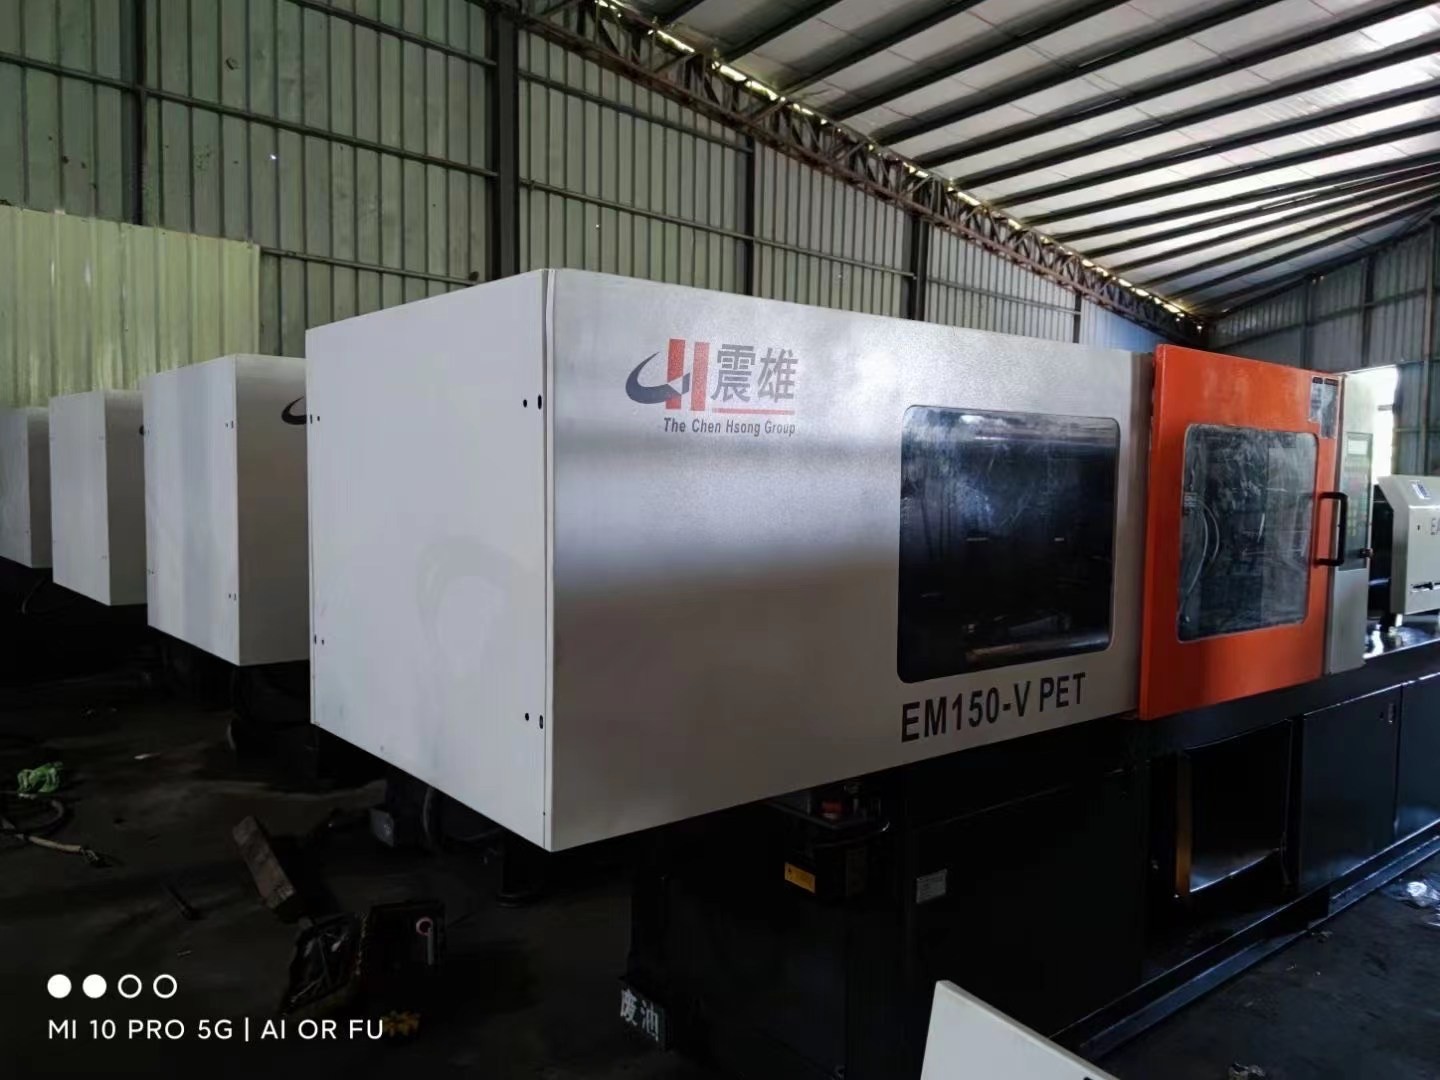  Used Small PET Injection Moulding Machine Chen Hsong EM150-V with Variable Pump Manufactures